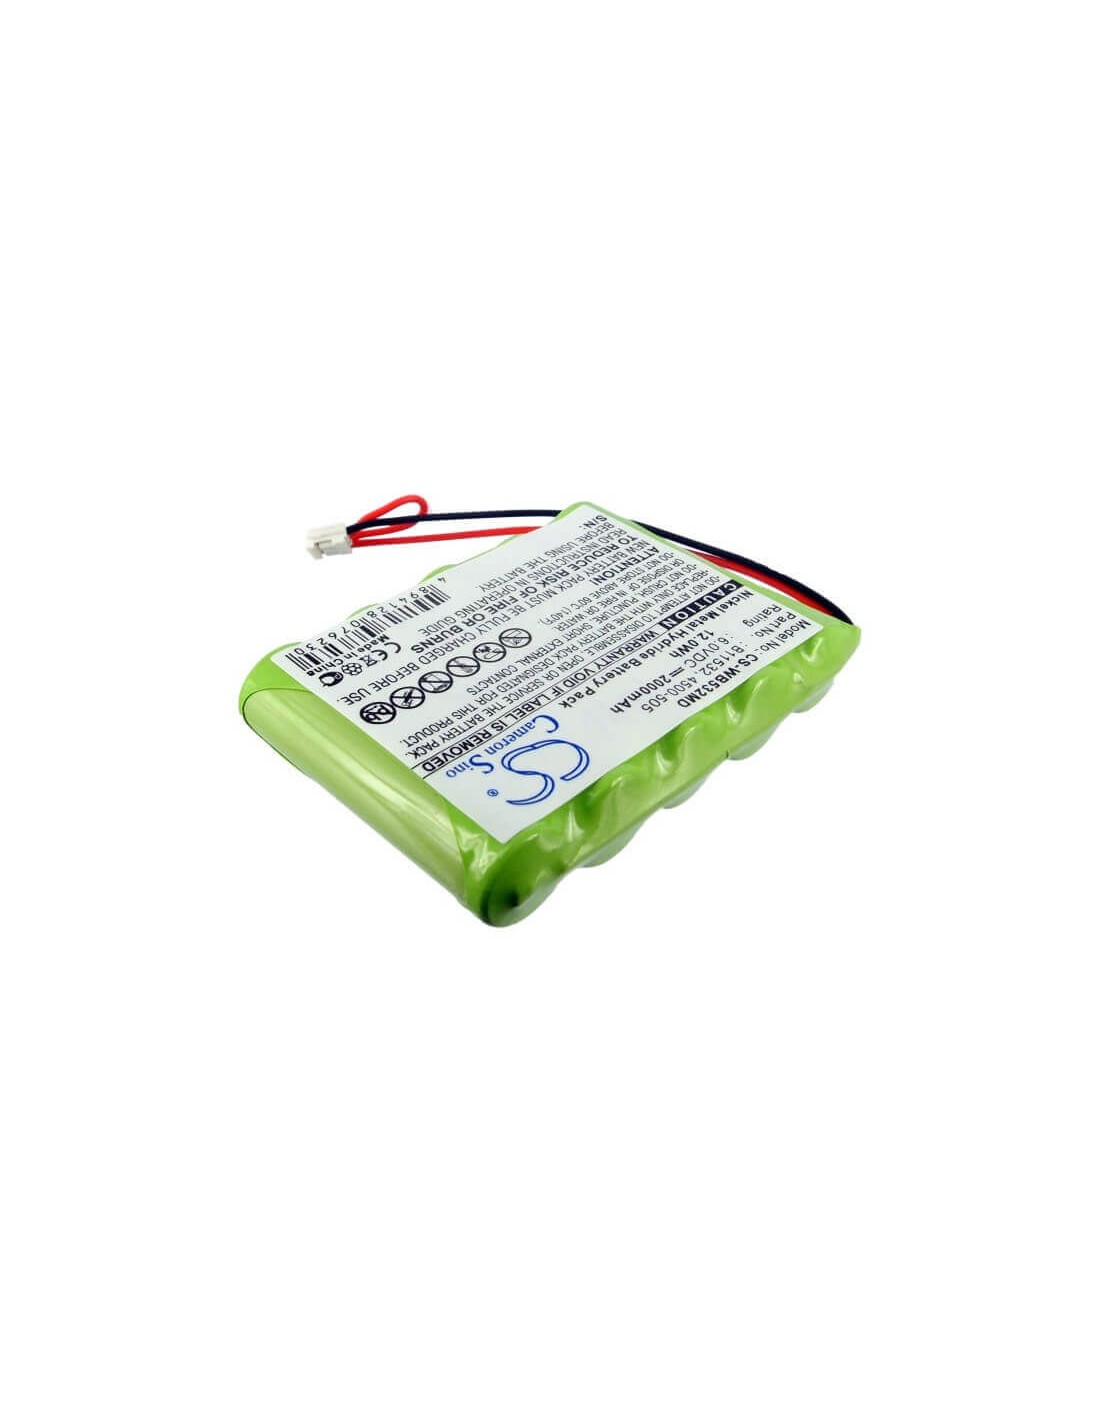 Battery for Welch-allyn Lxi Vital Signs Printer 6.0V, 2000mAh - 12.00Wh